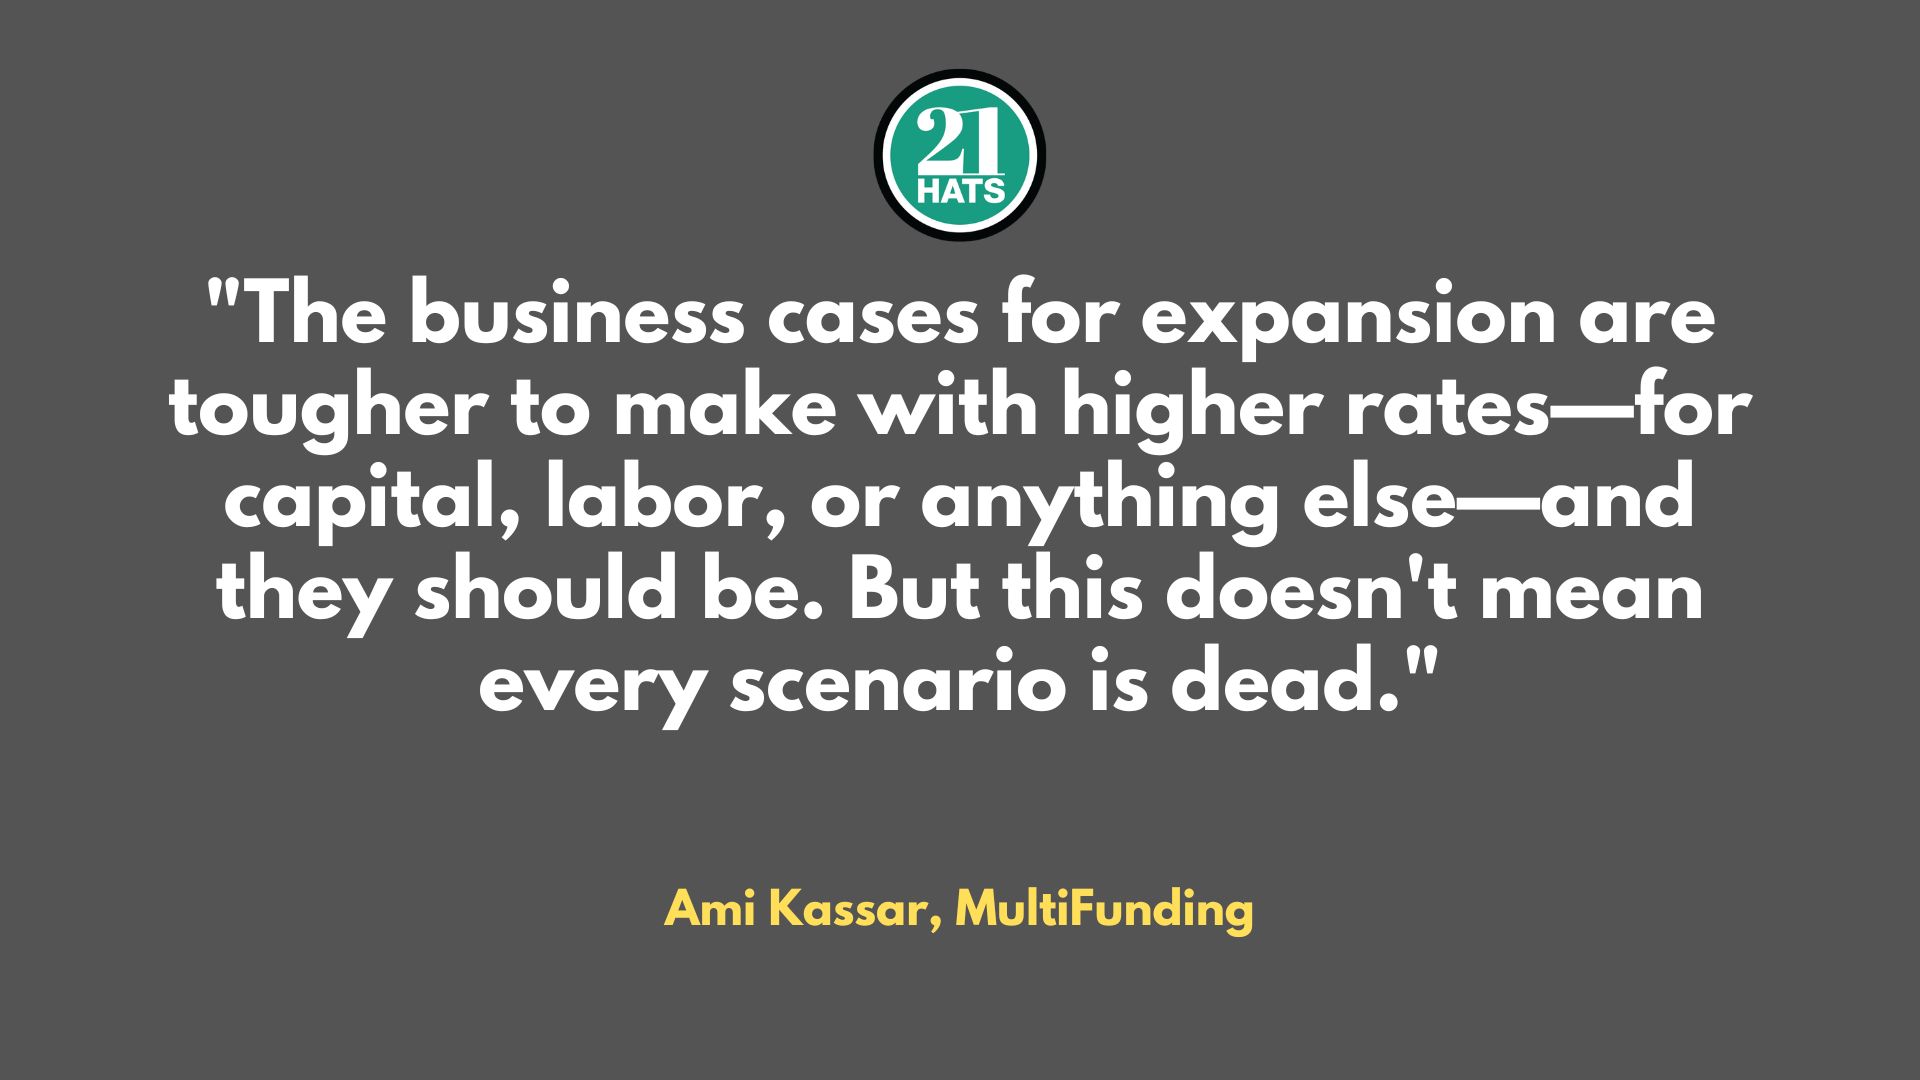 Ami Kassar on why your expansion plan may still work even with higher rates.